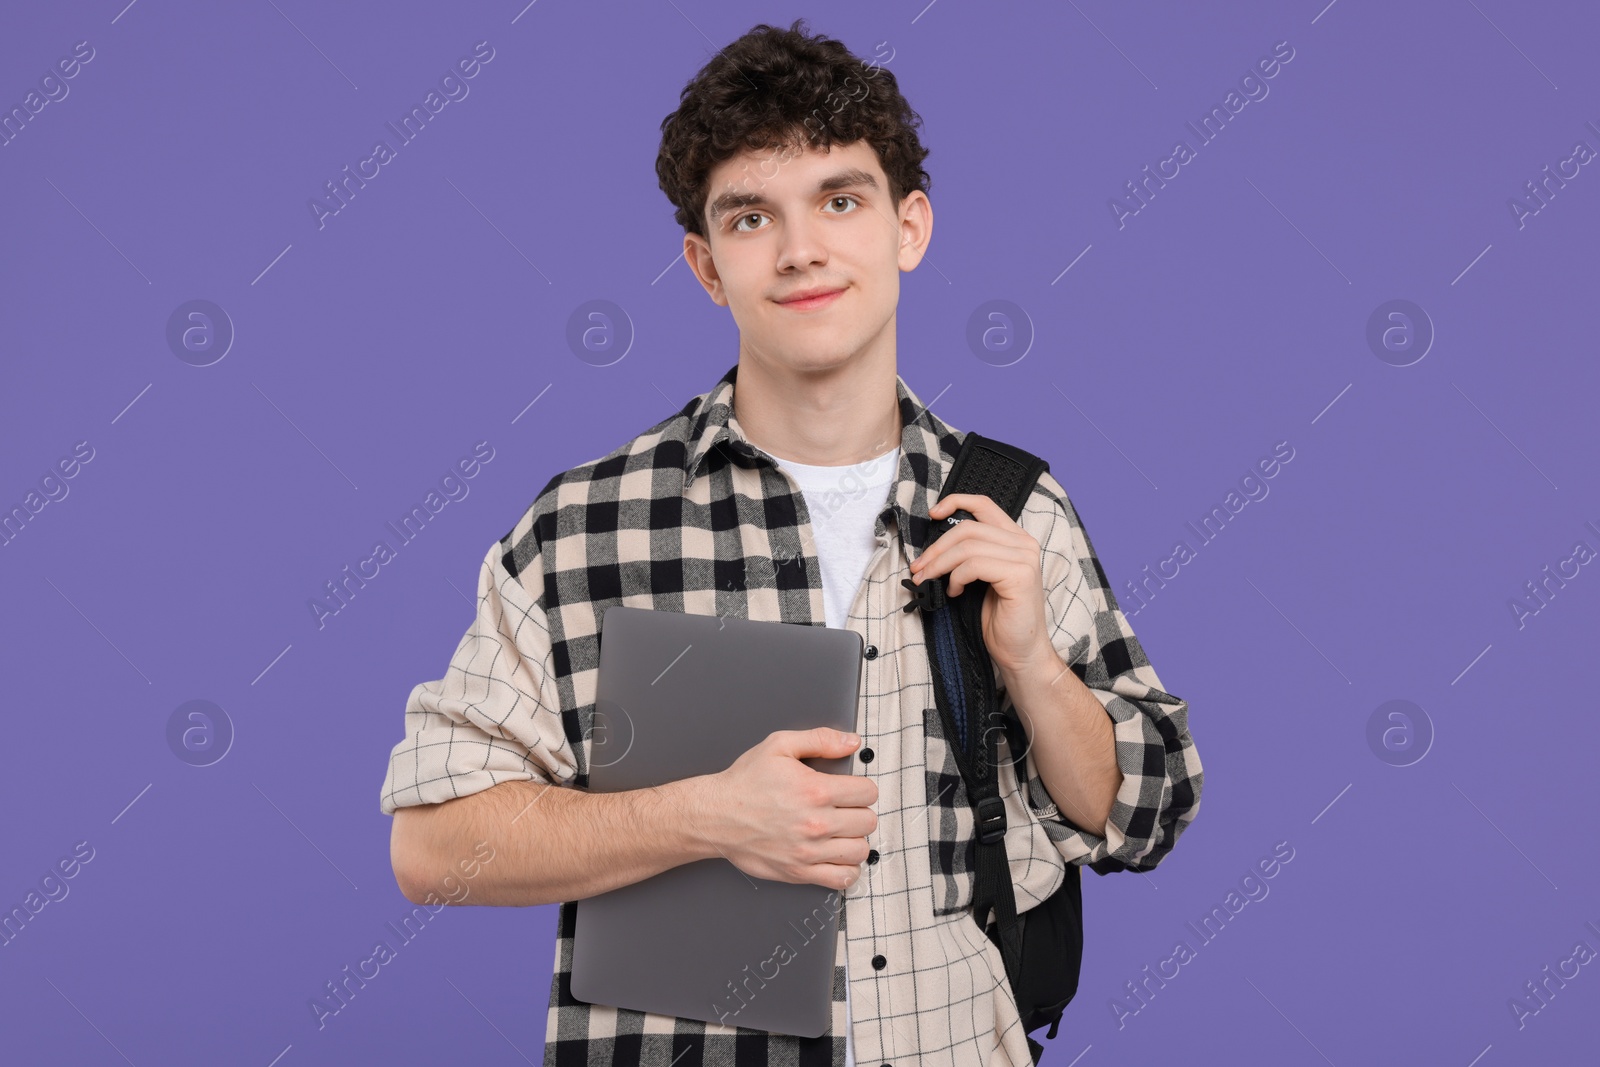 Photo of Portrait of student with backpack and laptop on purple background